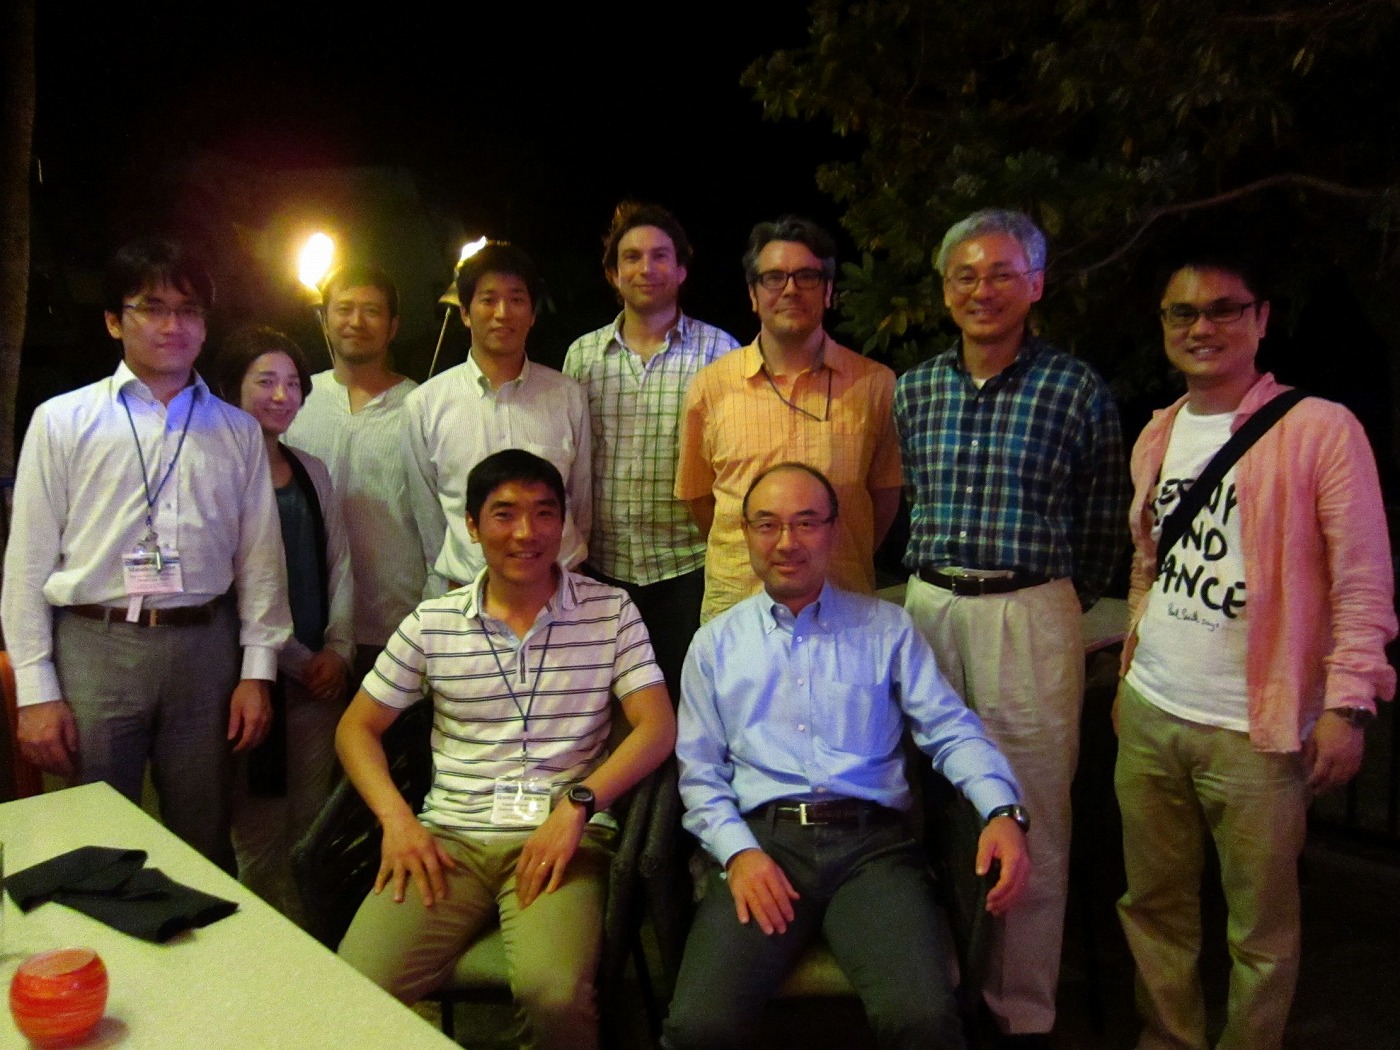 dinner with participants, January 7, 2016